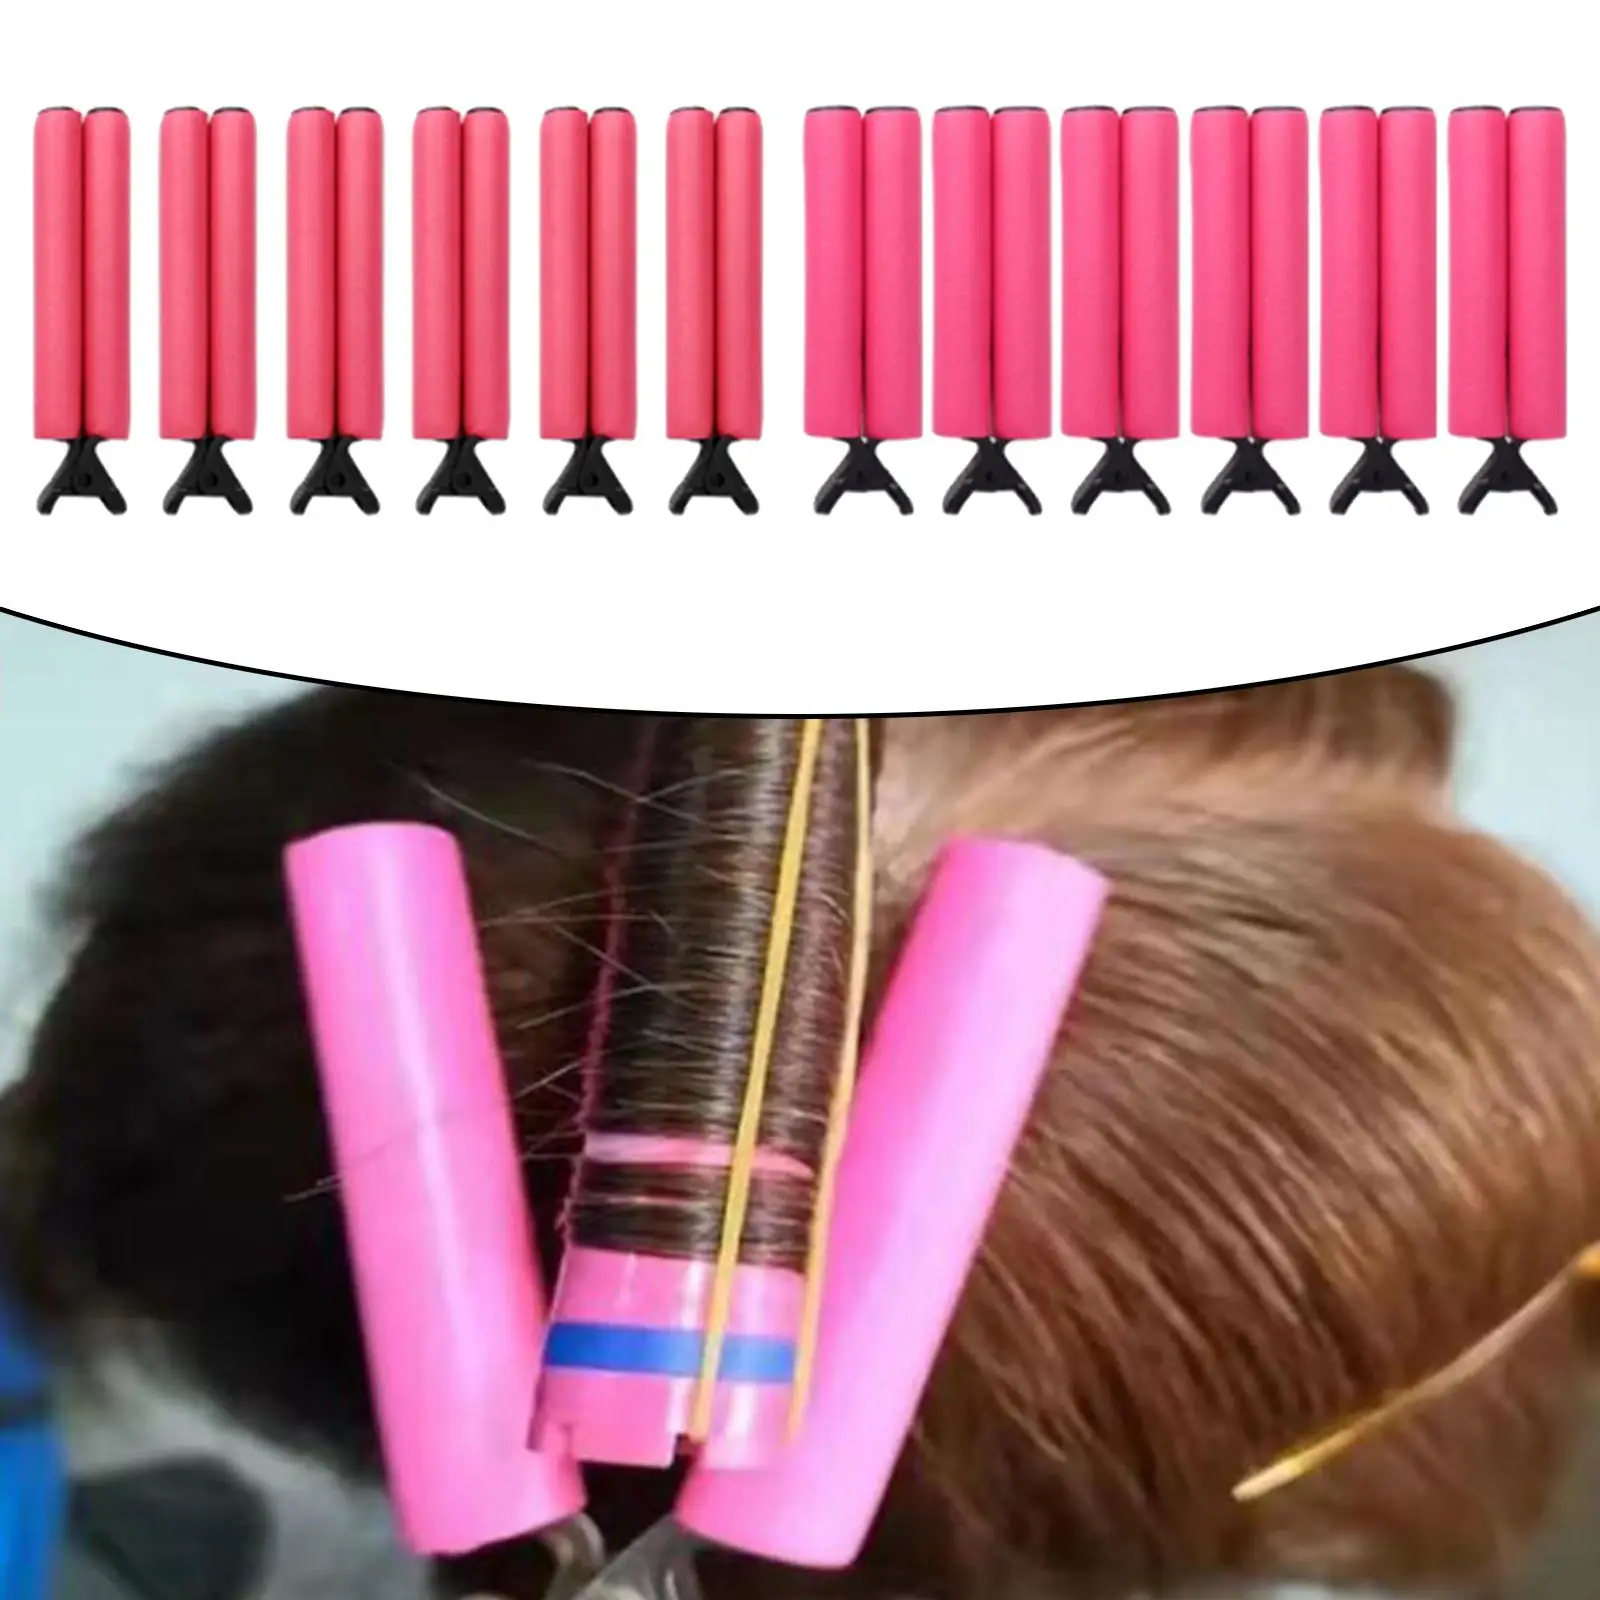 12 Insulation Clip, Hairdressing Tool Without Trace Perm Fixing Sponge Clips, for Barber Salon Easy to